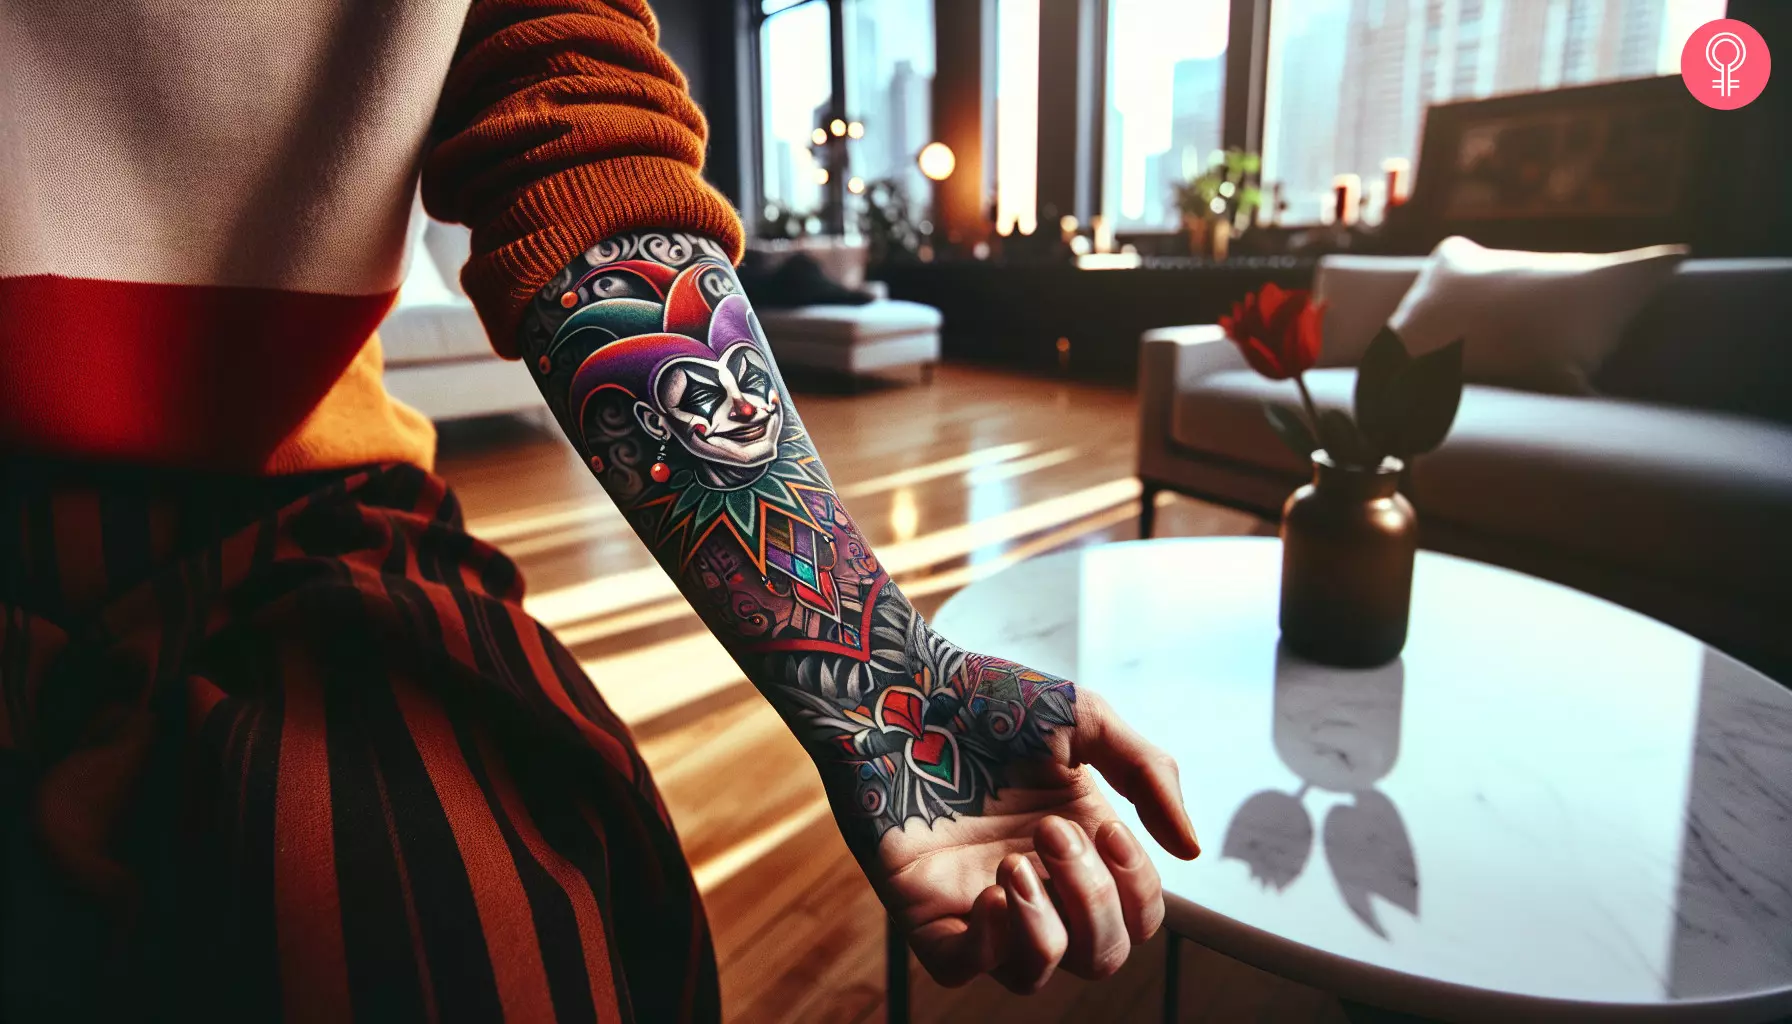 A joker tattoo design on the forearm of a woman